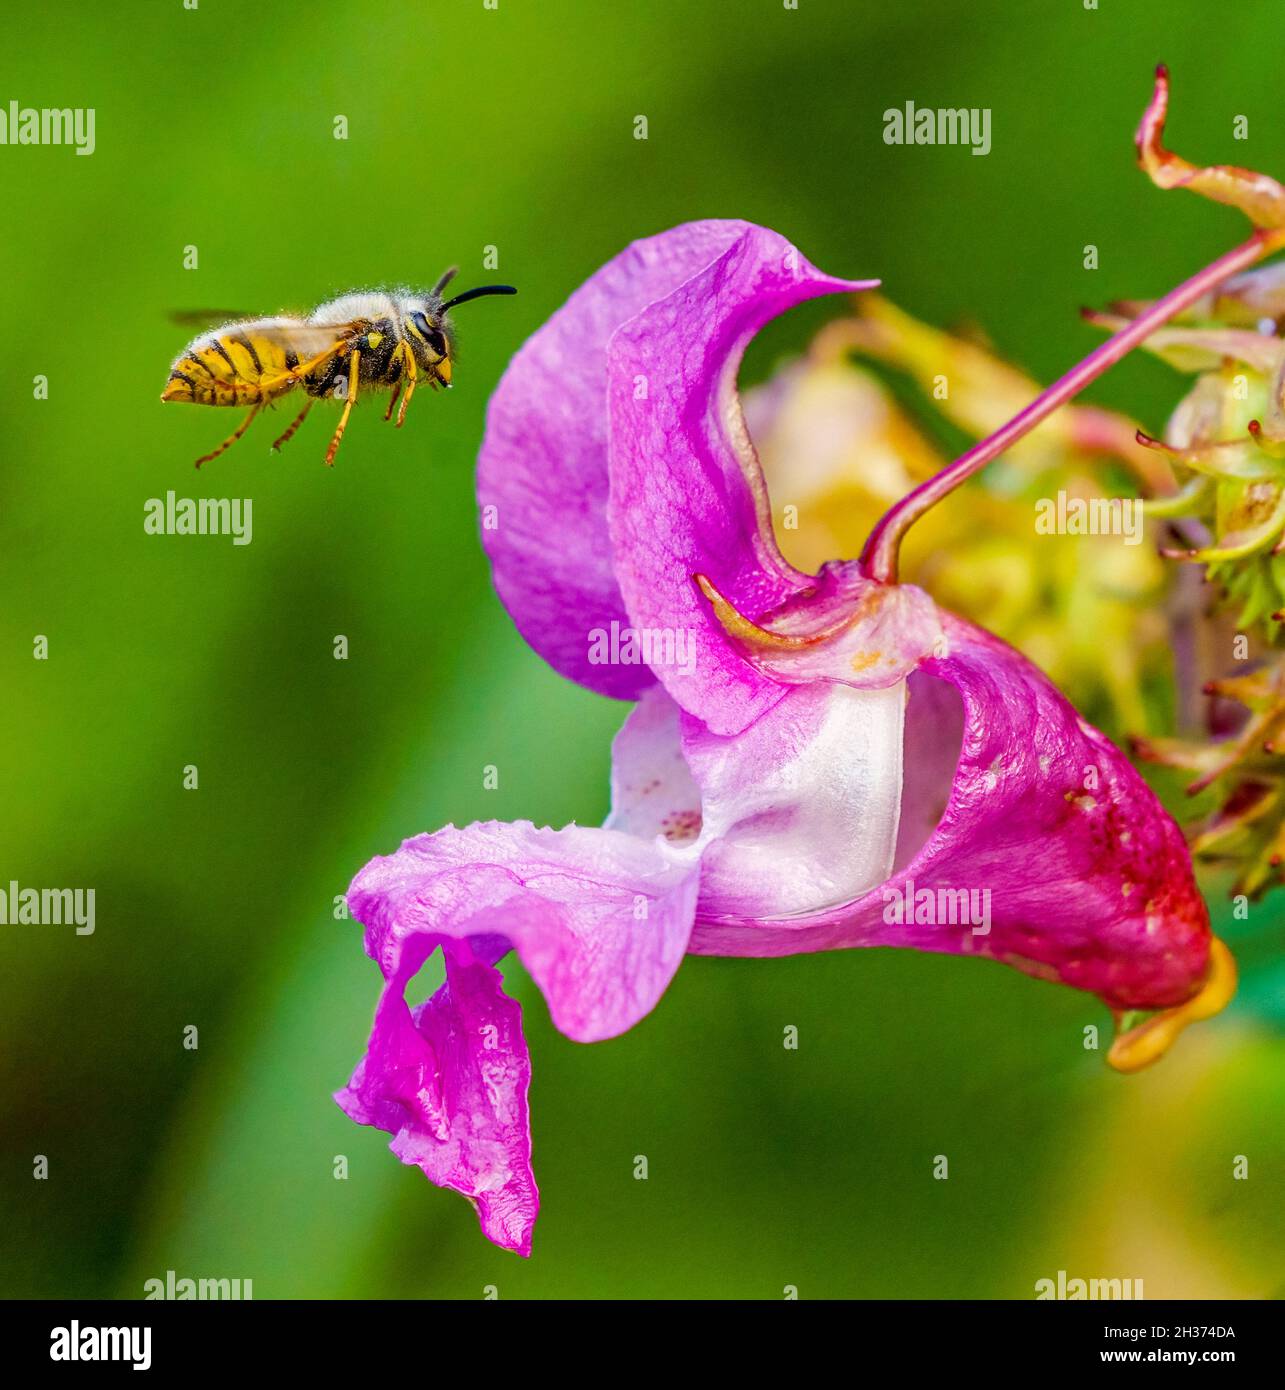 Hoverfly attracted to the succulence of summer wild flowers Stock Photo